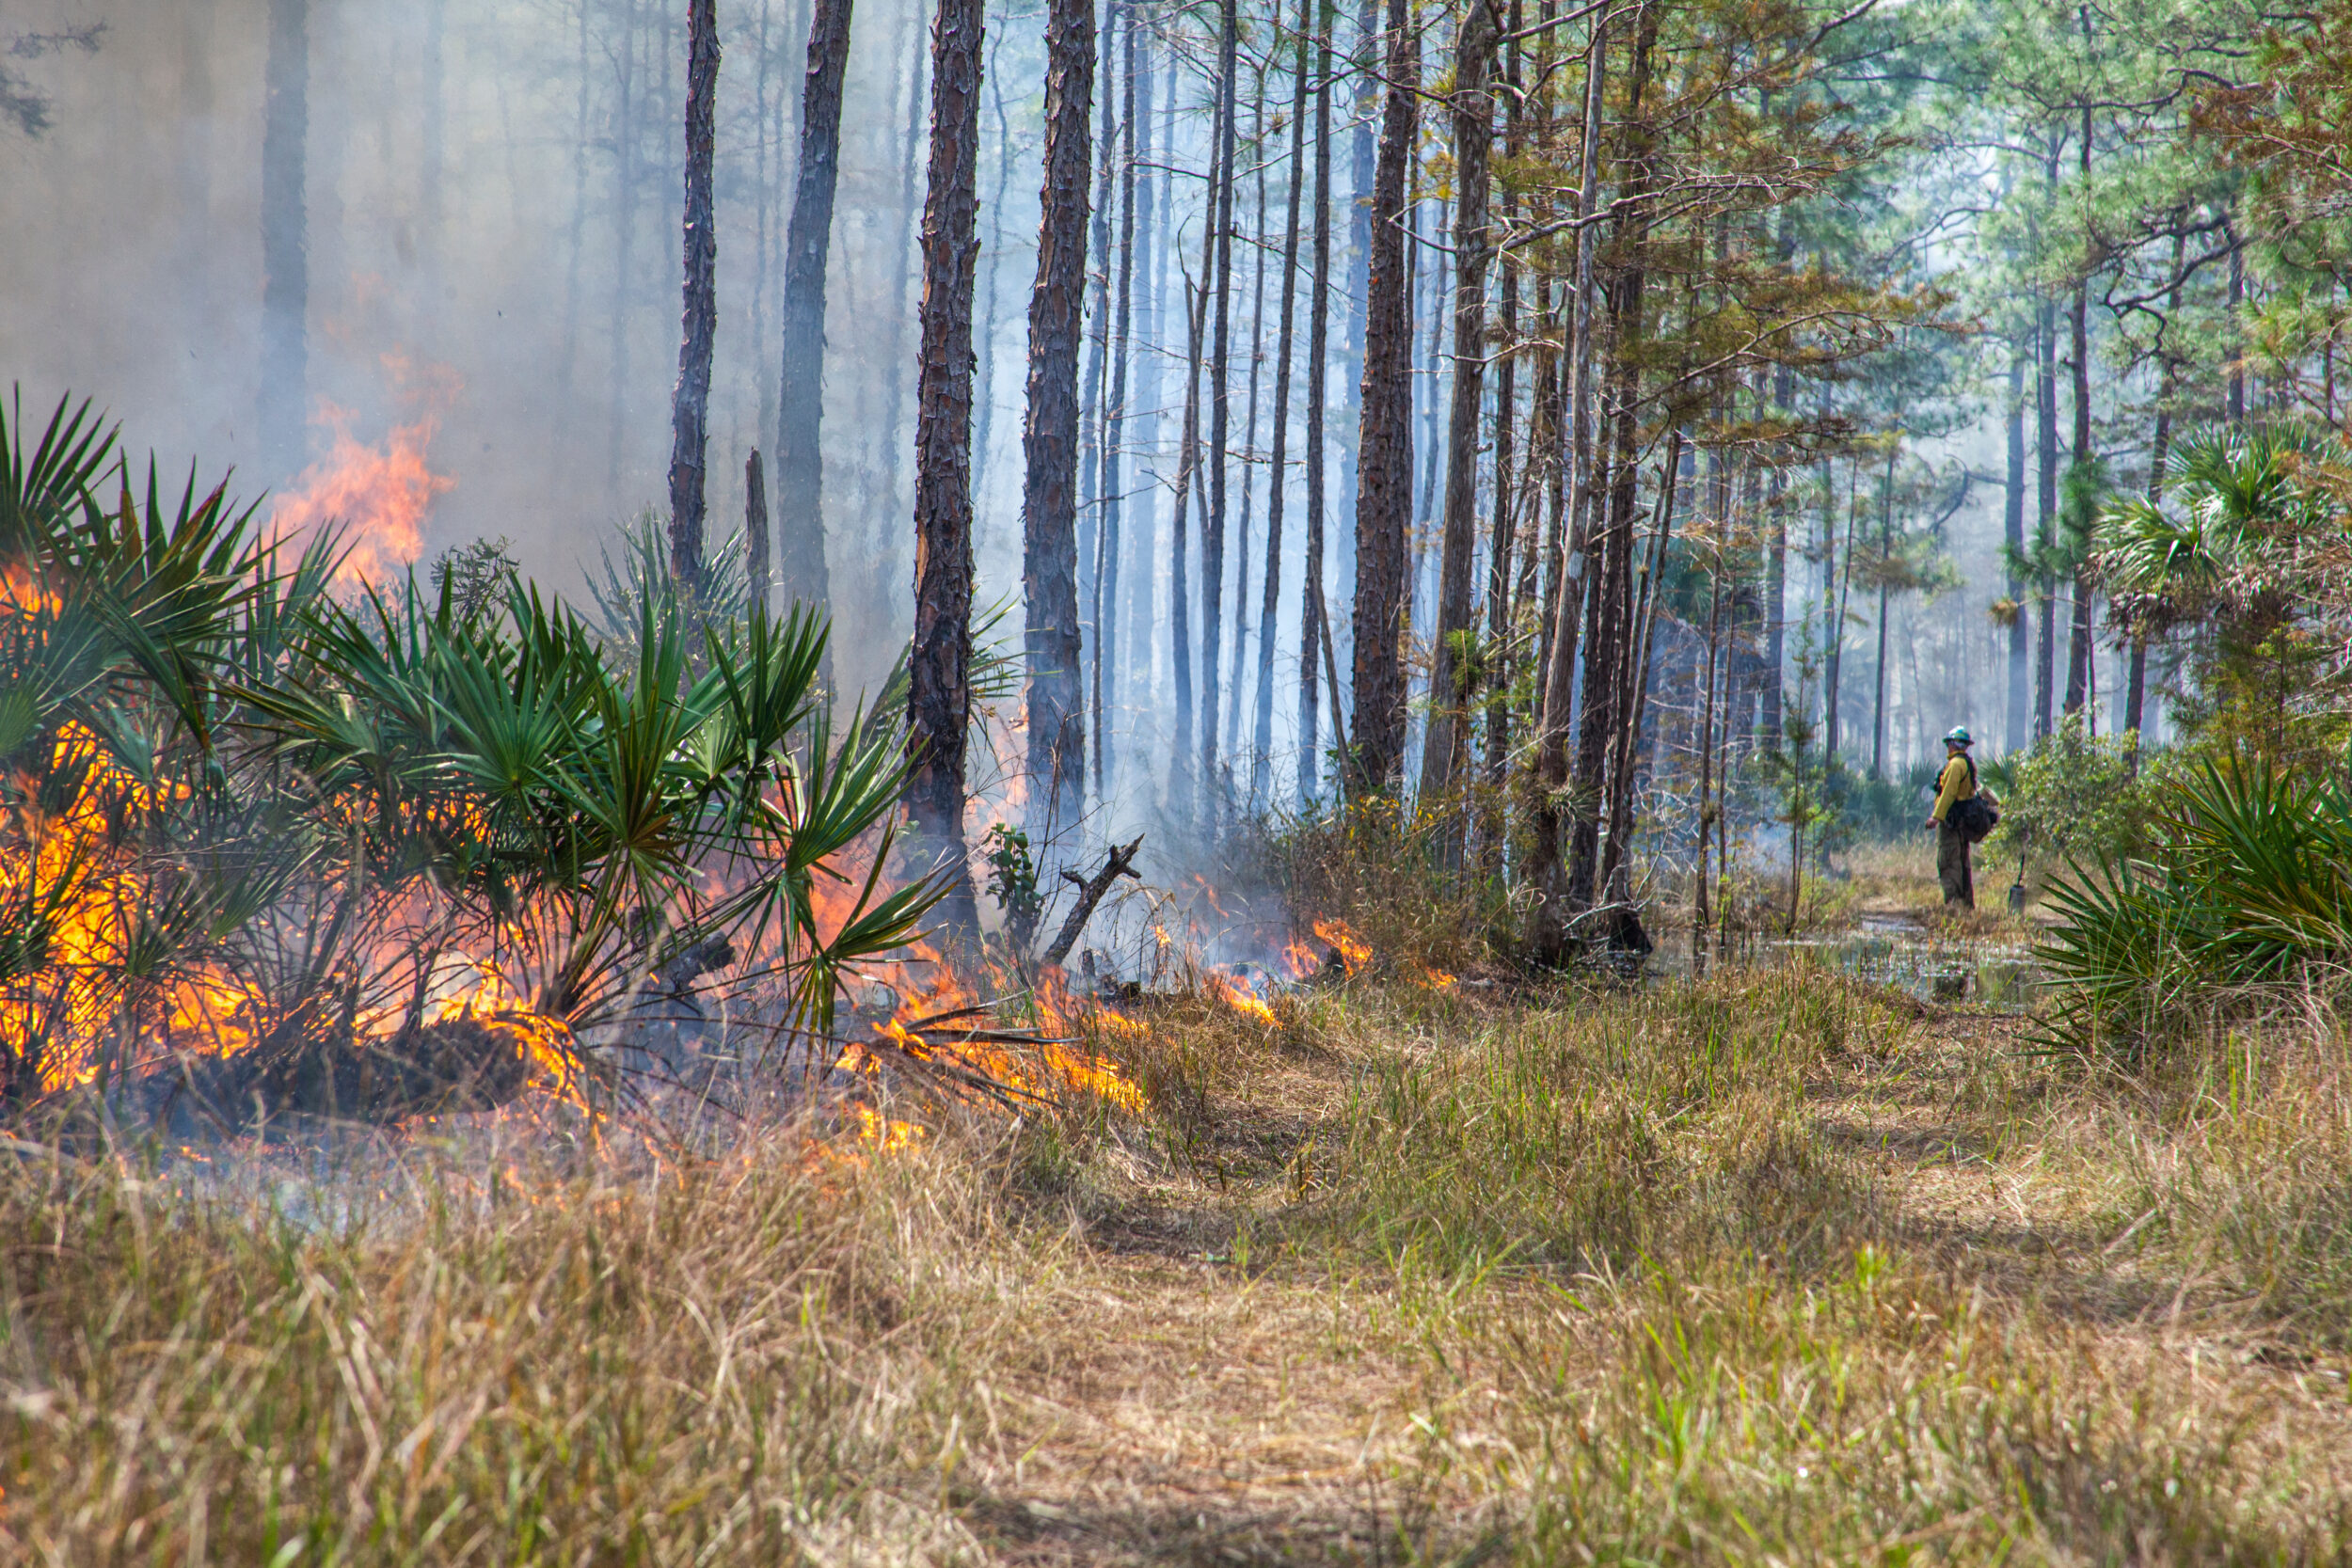 Using prescribed fire to control fuel loading and spur new tender growth for wildlife.